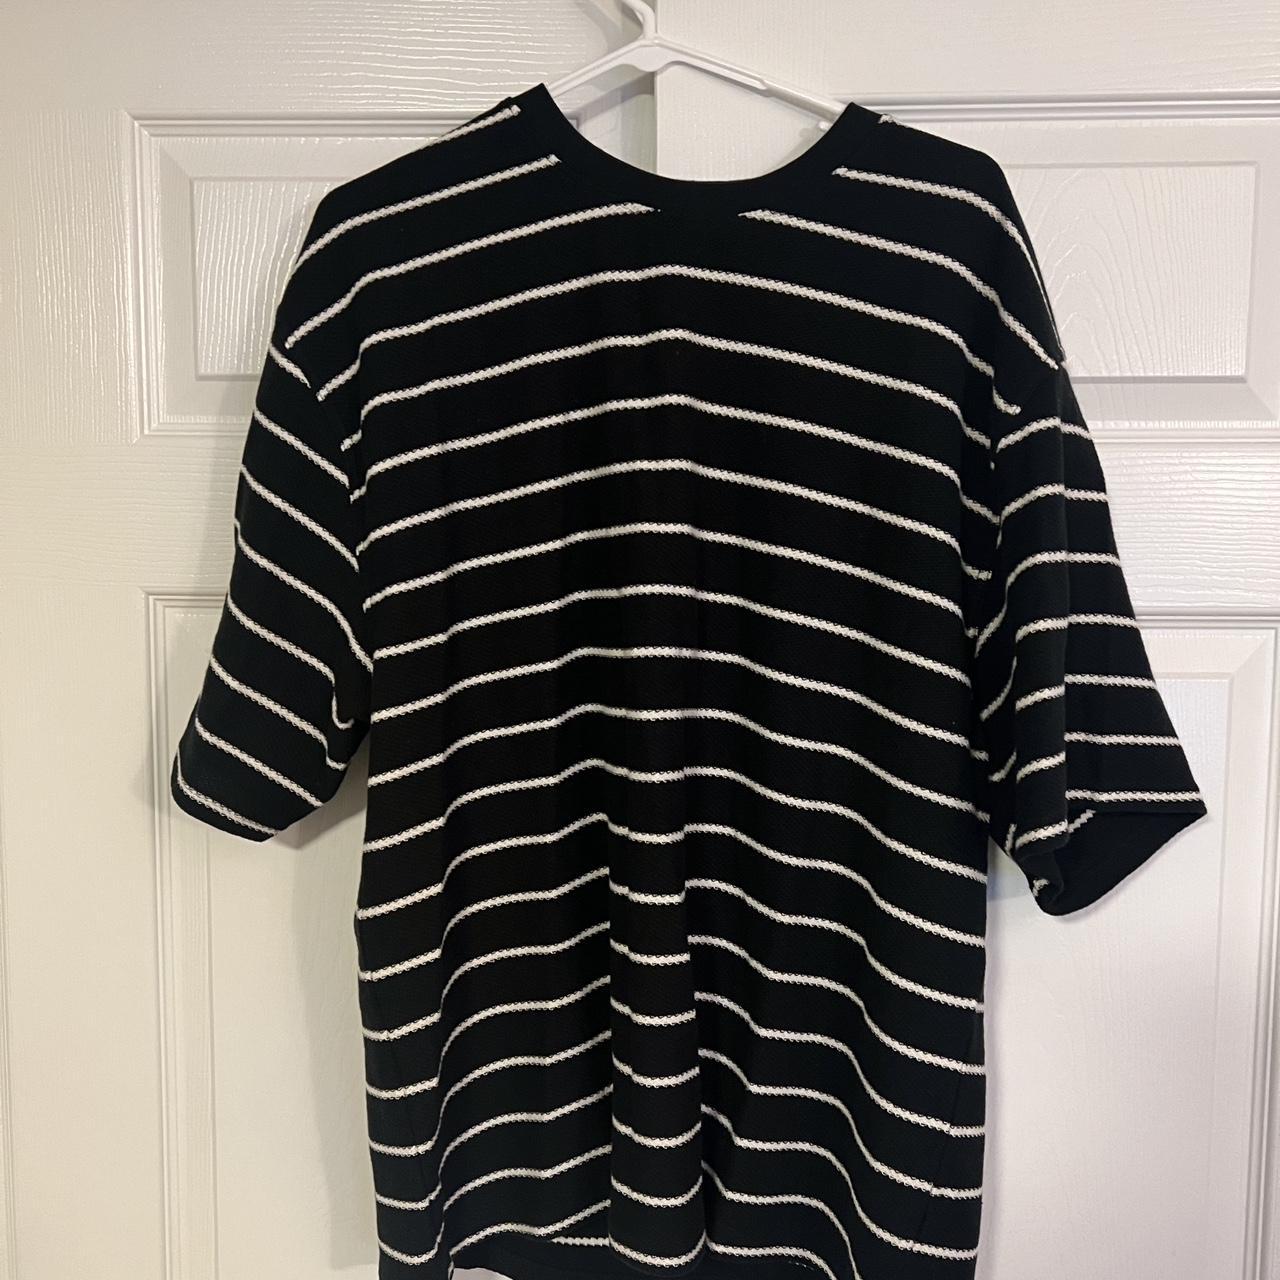 Large Black and White Stripped PacSun Shirt Never... - Depop